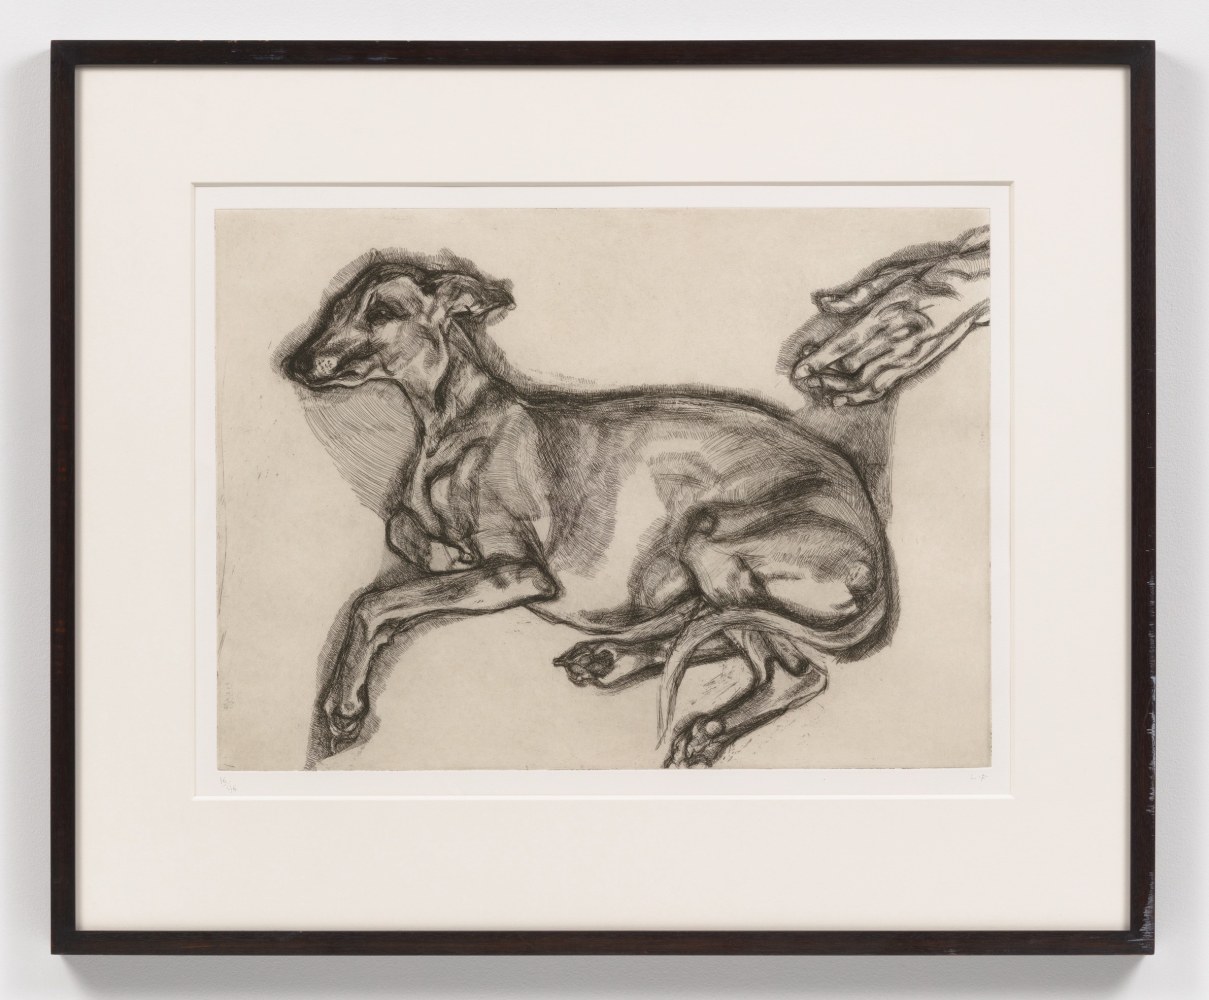 Lucian Freud

Pluto Aged Twelve, 2000

etching on white Somerset textured paper, ed. of 46

22 1/2 x 28 1/2 in. / 57.2 x 72.4 cm